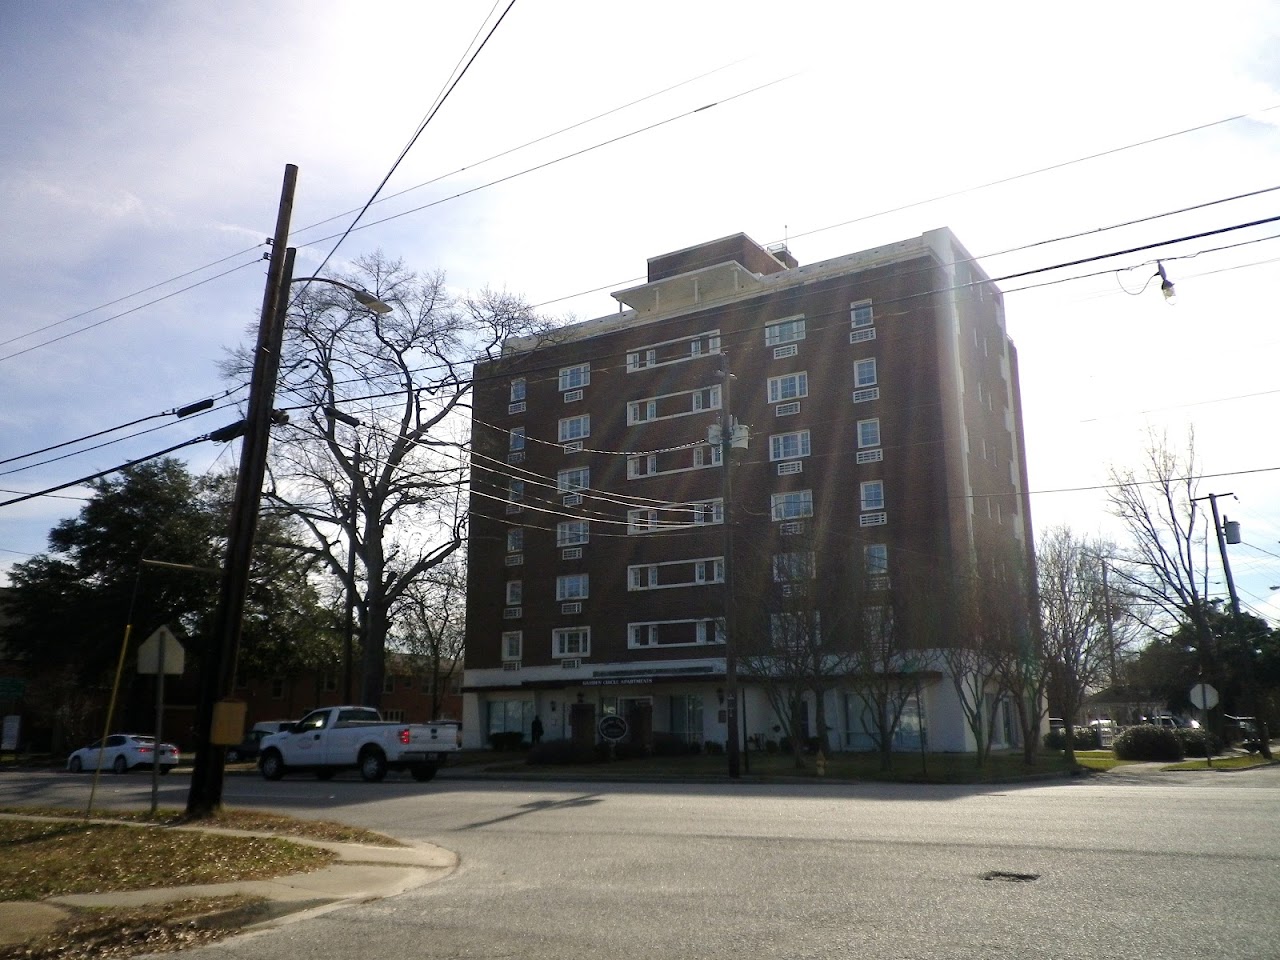 Photo of GARDEN CIRCLE APTS. Affordable housing located at 202 E LIBERTY ST SUMTER, SC 29150